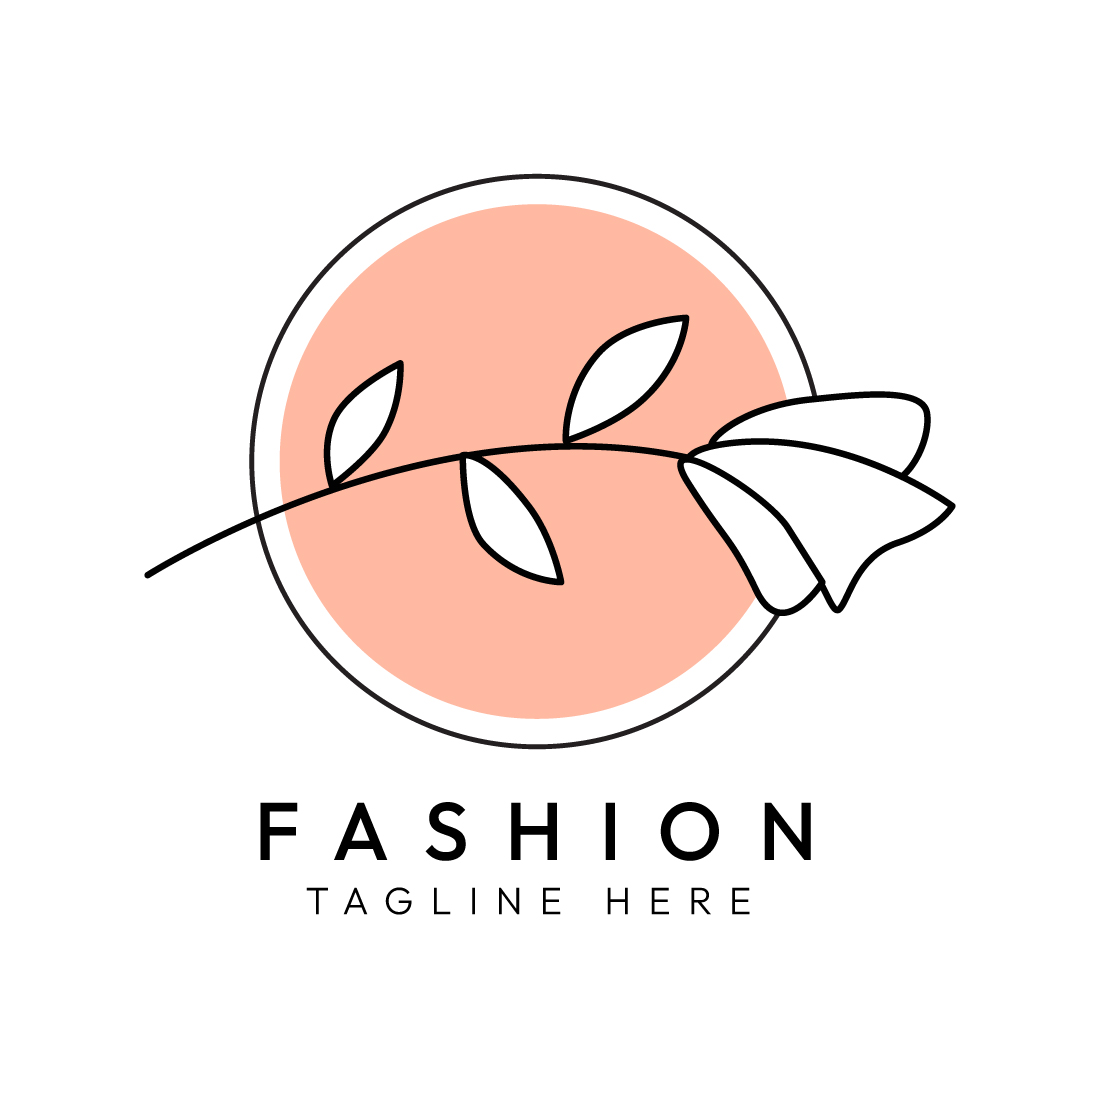 Minimalist Line Art Fashion and Beauty Logo Design Bundle - Master Collection cover image.